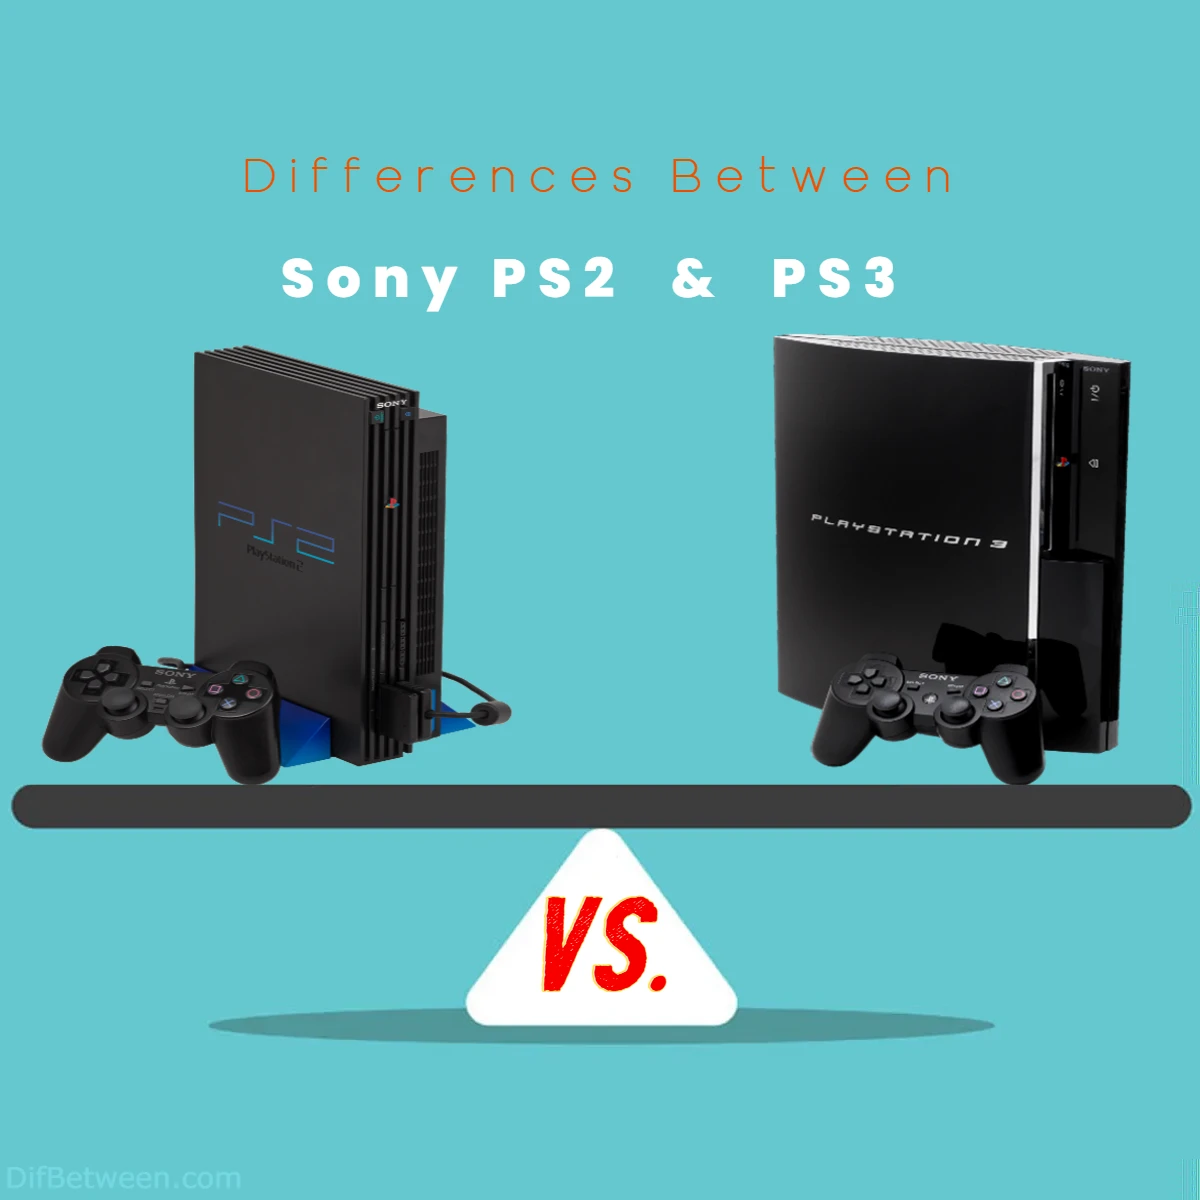 Differences Between Sony PS2 vs PS3